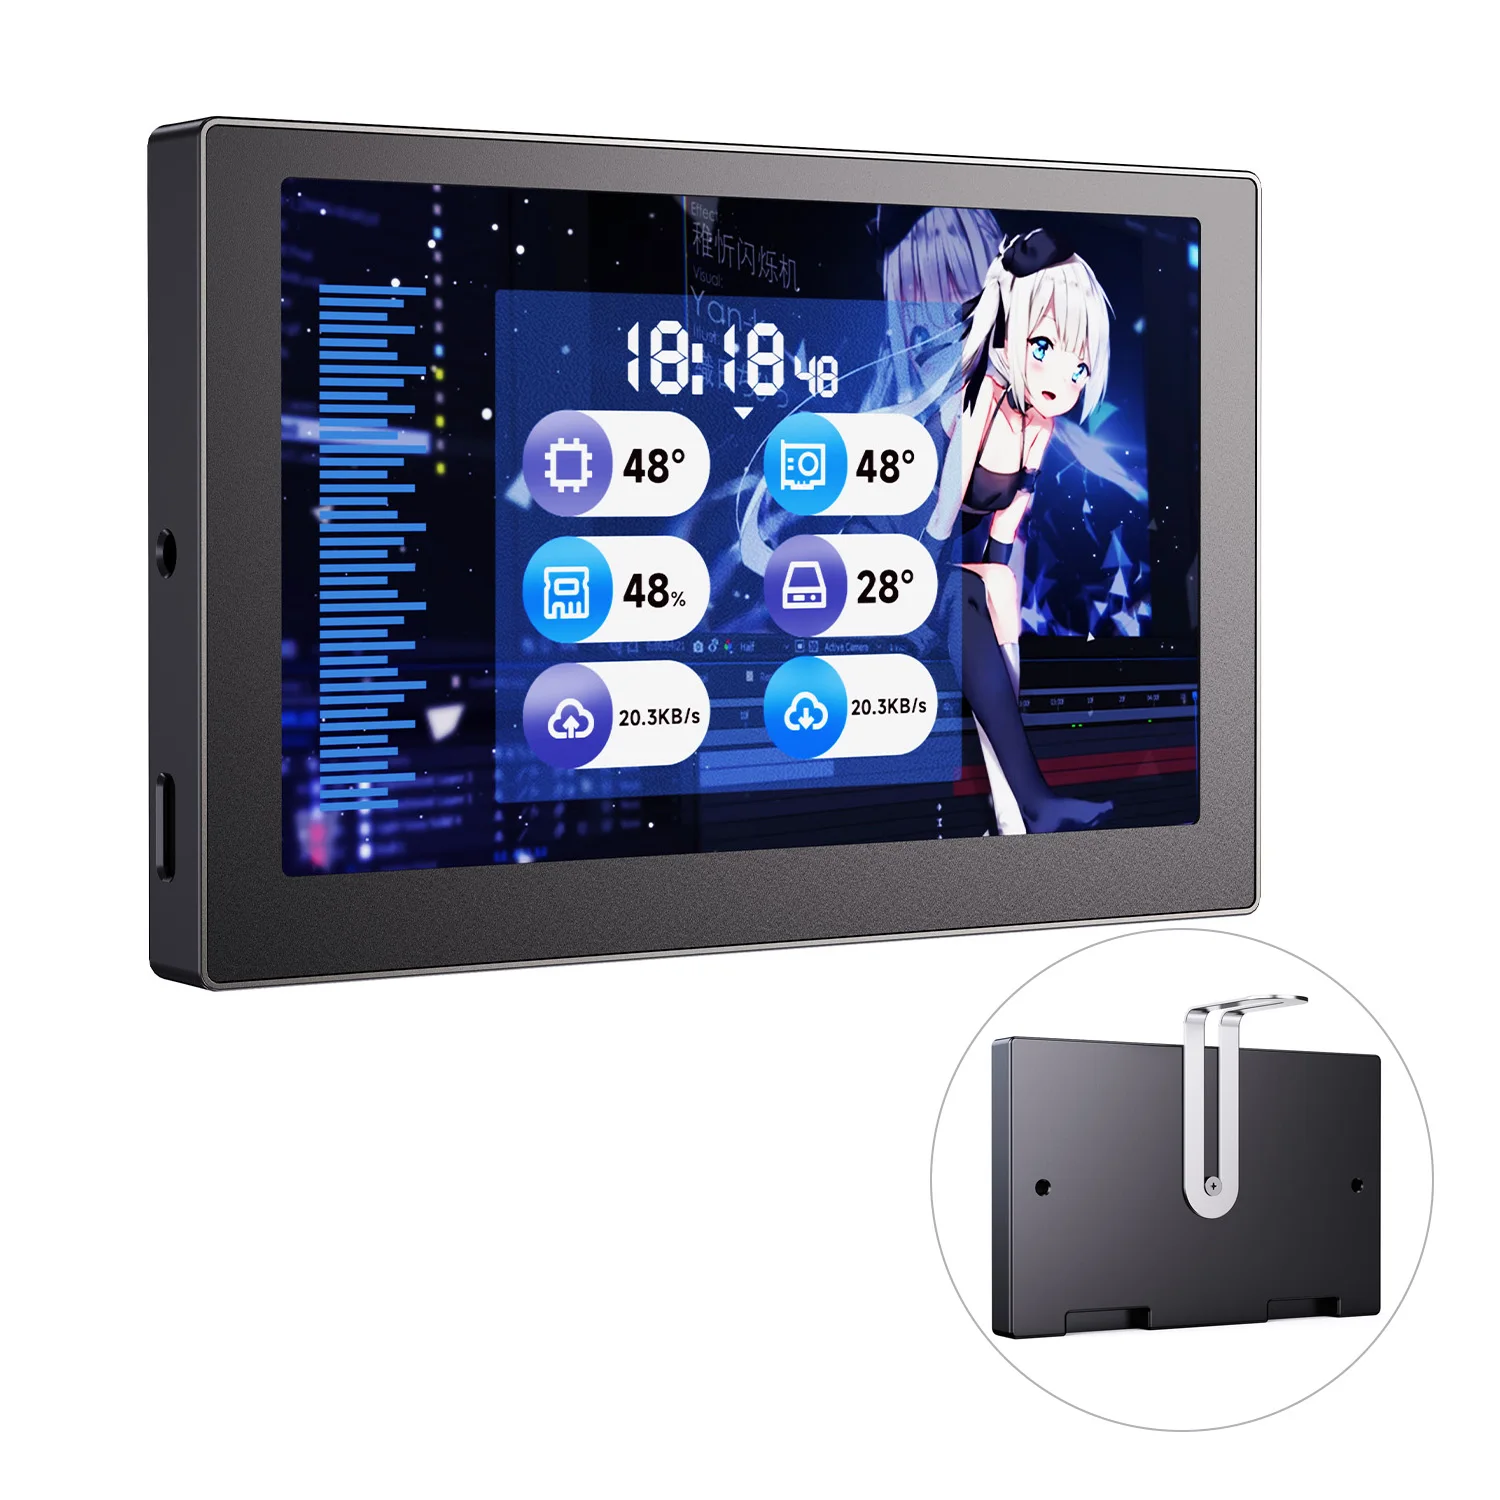 

Waveshare USB Monitor, 5/7 Inch USB Monitor PC Case Secondary Screen /Desktop RGB Ambient Screen, IPS Panel, 800×480 / 1024×600